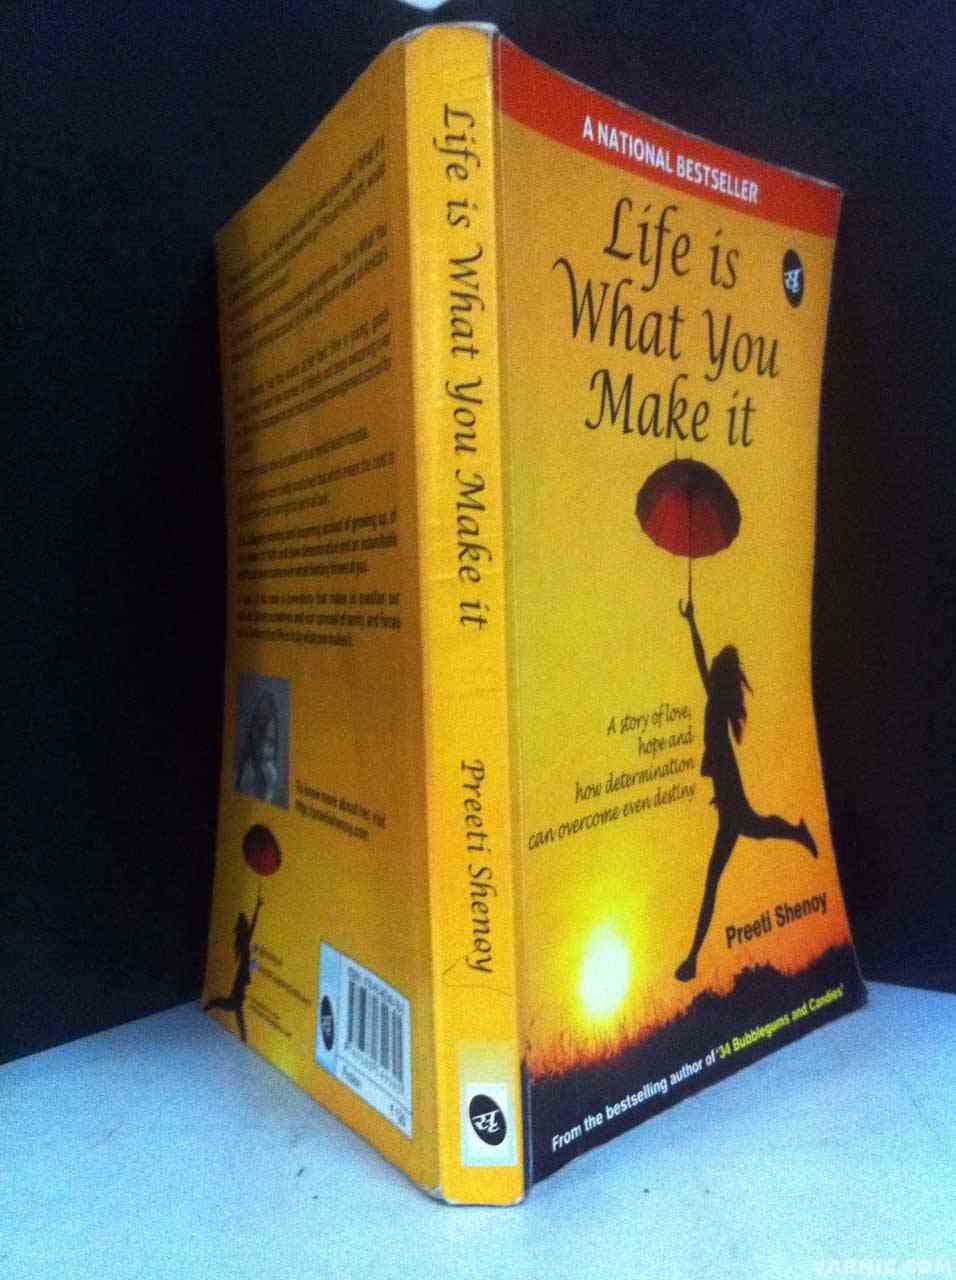 Life-is-what-you-make-it-Varnic-book-review